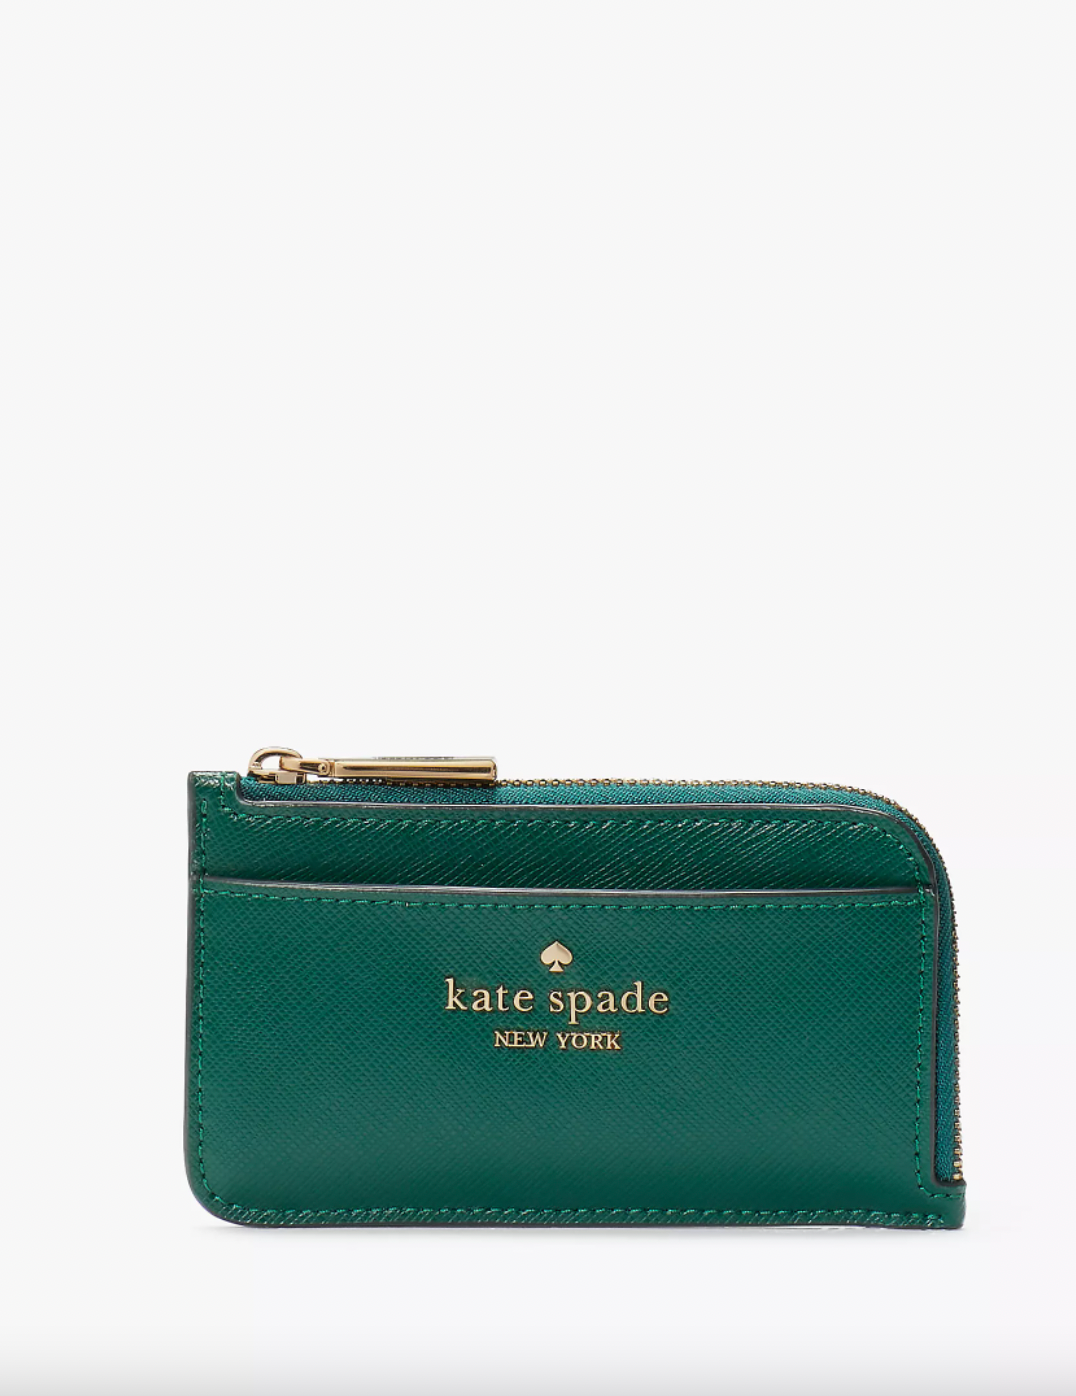 KATE SPADE OUTLET SHOPPING * HANDBAGS 70% OFF PLUS 20% SALE SHOP WITH ME  2019 - YouTube